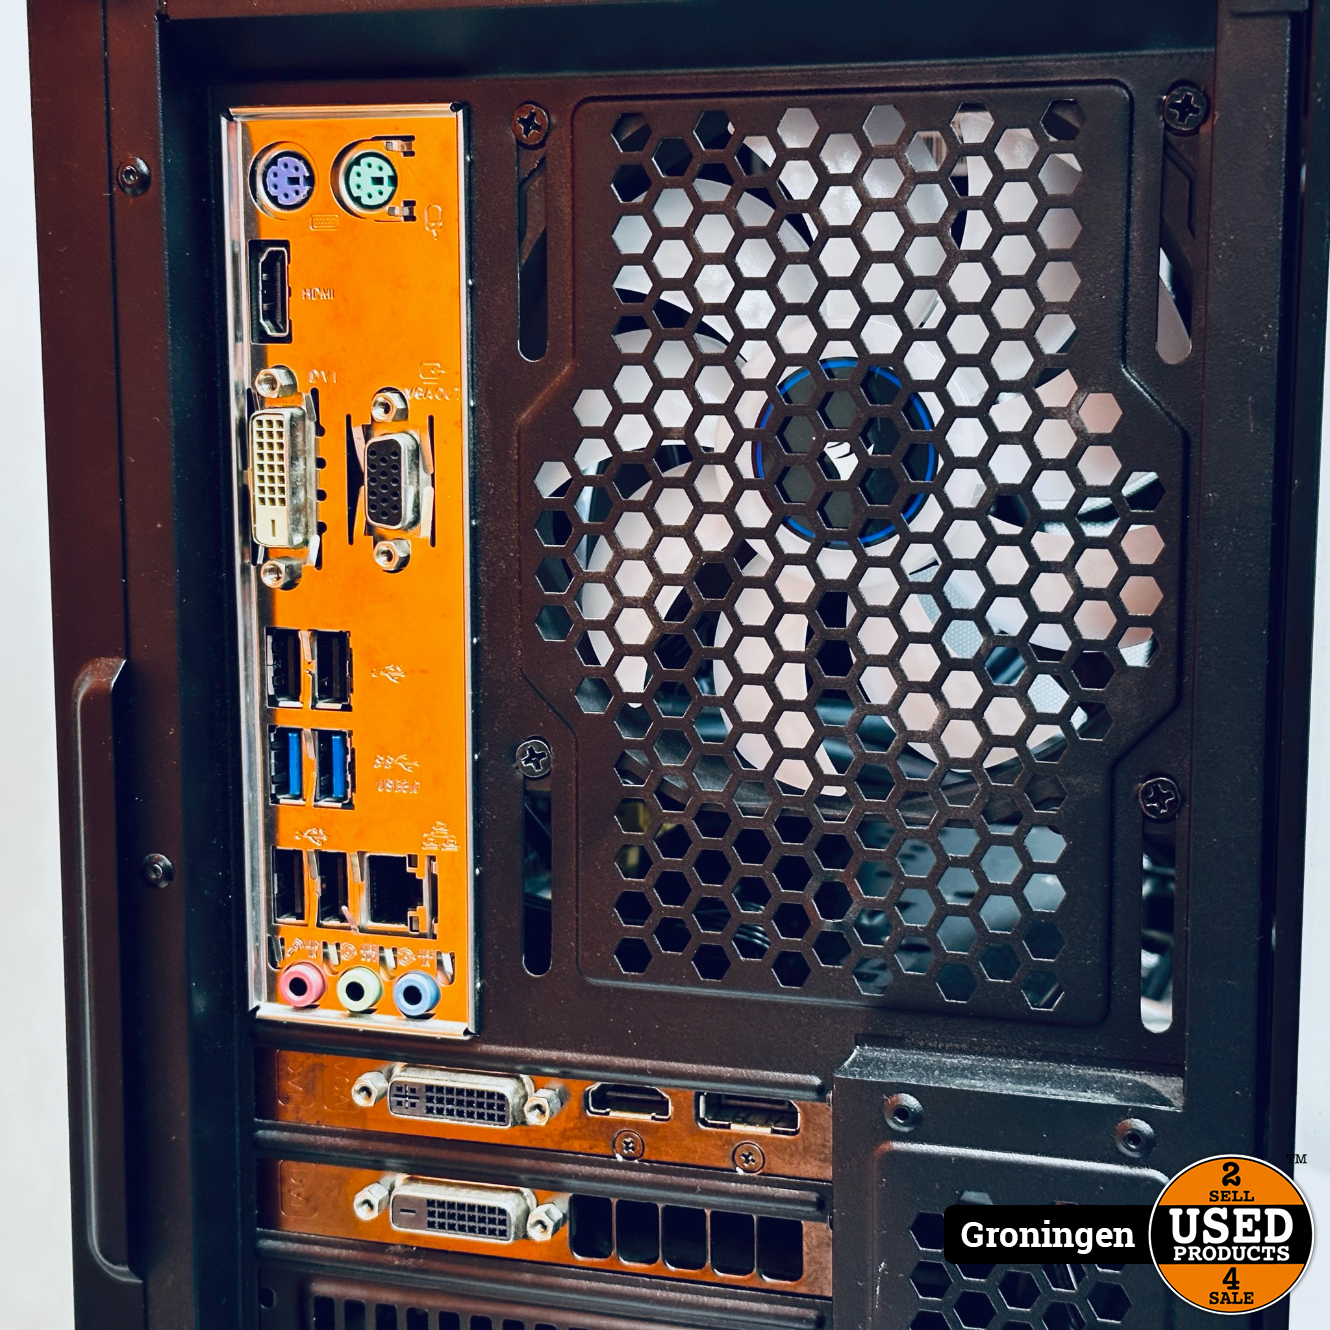 Game Pc Met Waterkoeling | Core I7 | 16Gb Ram | Geforce Gtx970 | 1,256Tb  Ssd+Hdd | W10 - Used Products Groningen